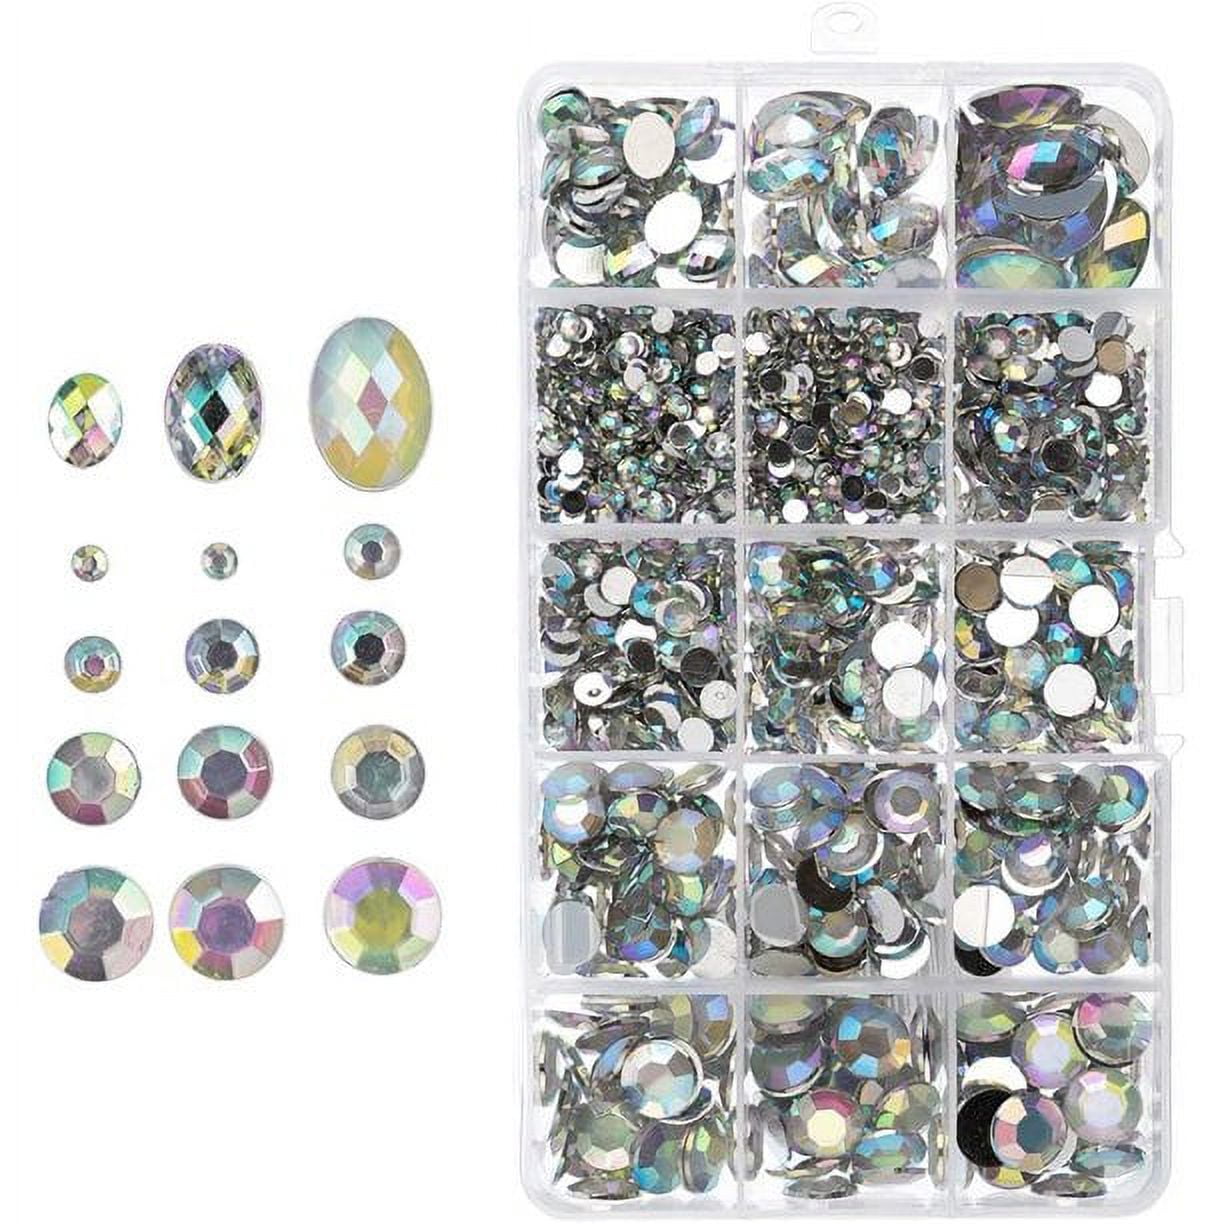 7mm Crystal Clear CH38 Bedazzler Rhinestones Size 30 - 100 Pcs